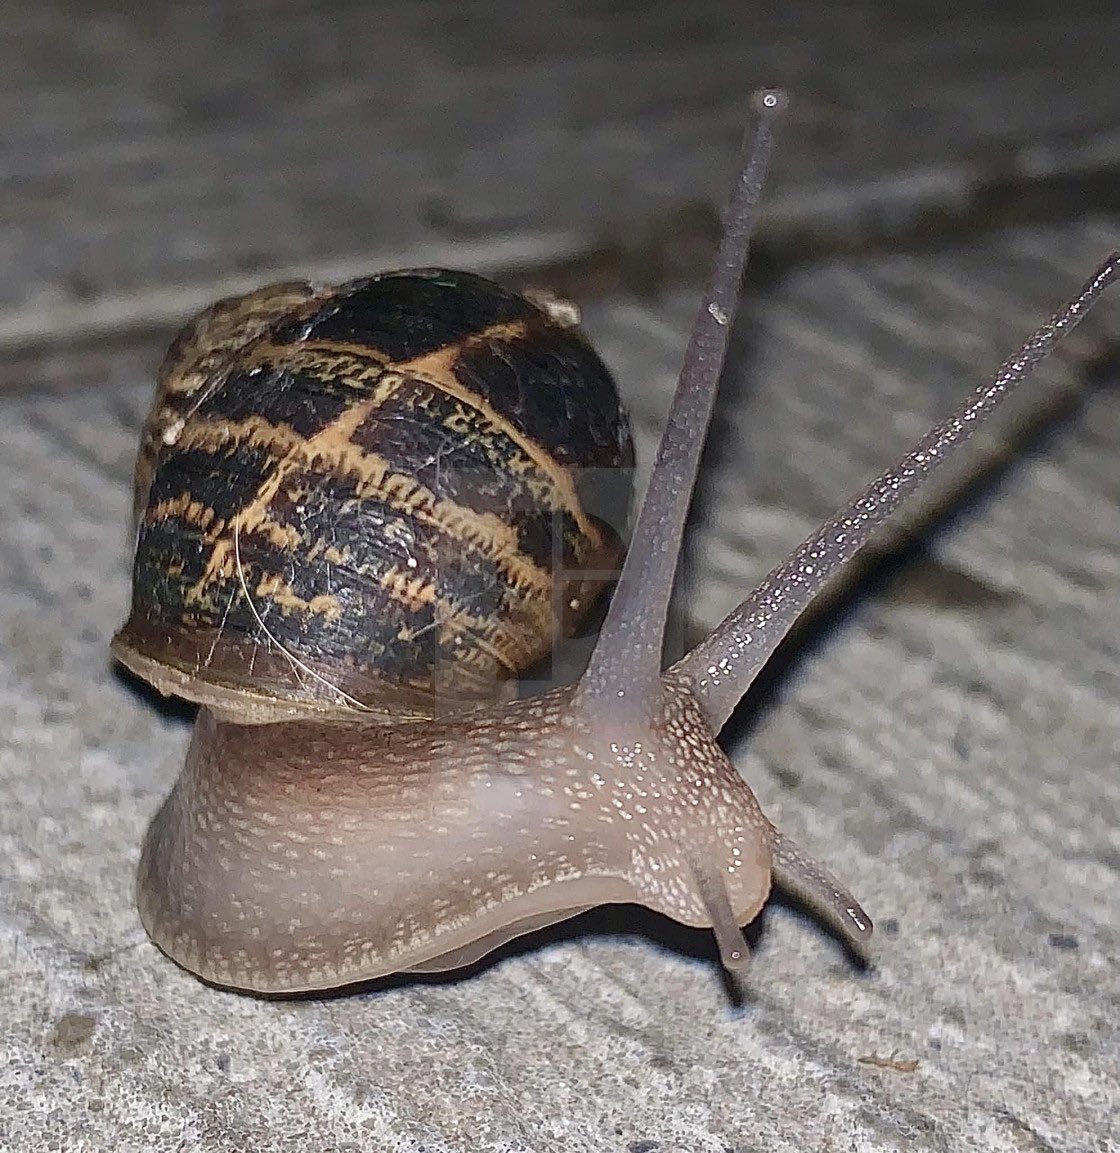 Photo of the day…..
Slow and steady wins the race 🐌 
#snail #gastropod #shell #eveningstroll #tentacle #plymouthphotographer #mollusc #helixaspersa #snailphotography #gardensnail #eyes #closeup #closeupphotography #snailsofinstagram 

ange21.picfair.com/pics/017057971…